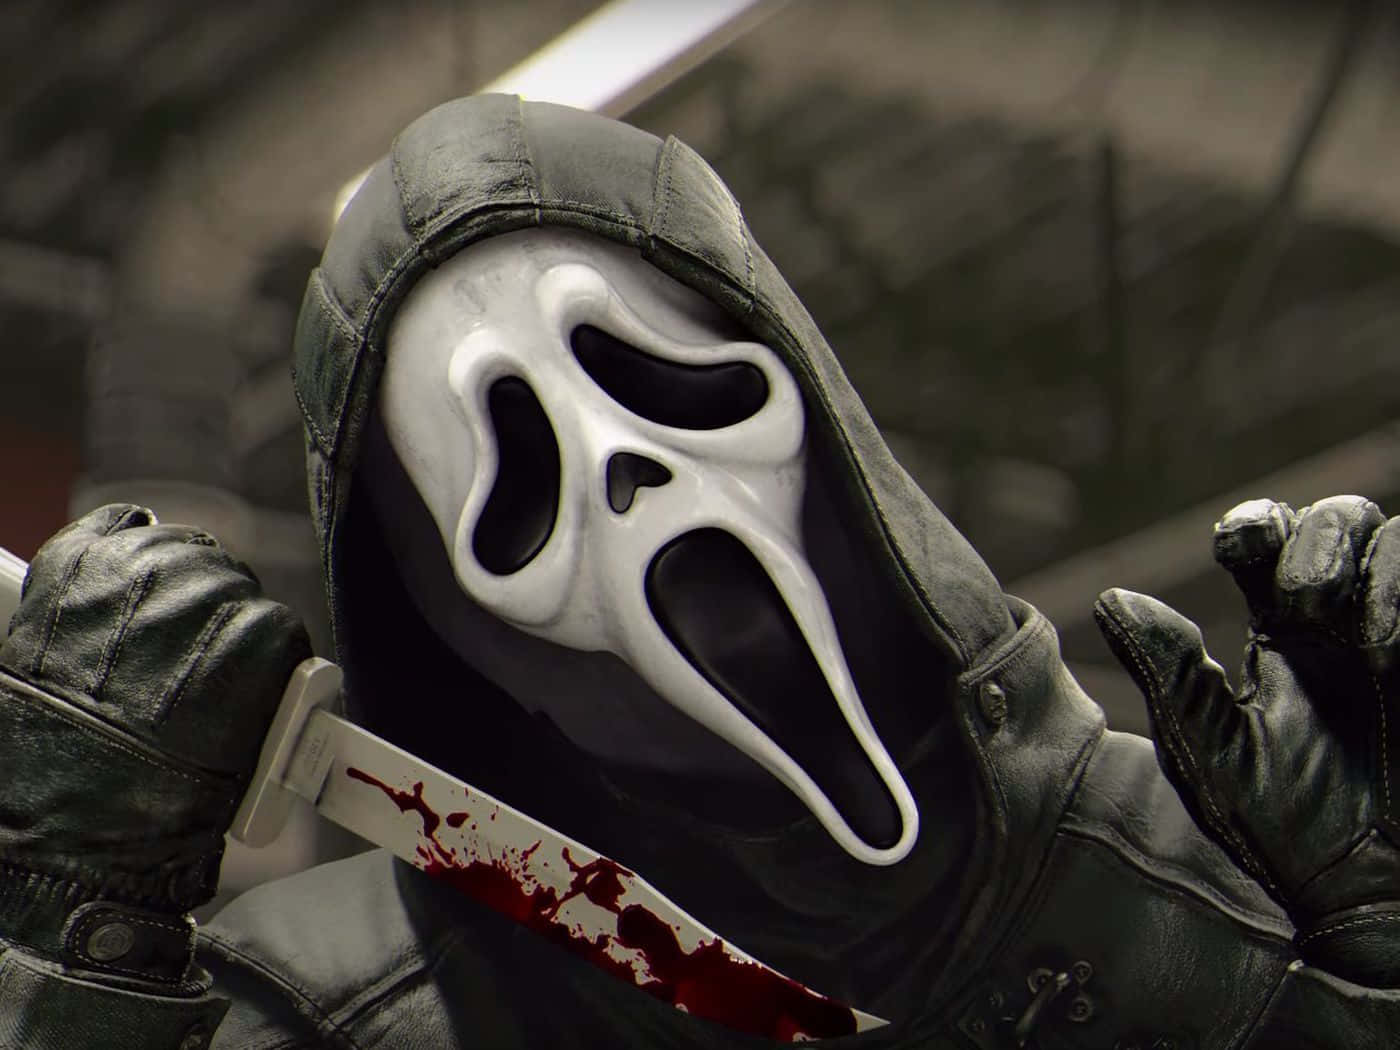 "The iconic character from the Scream series" Wallpaper